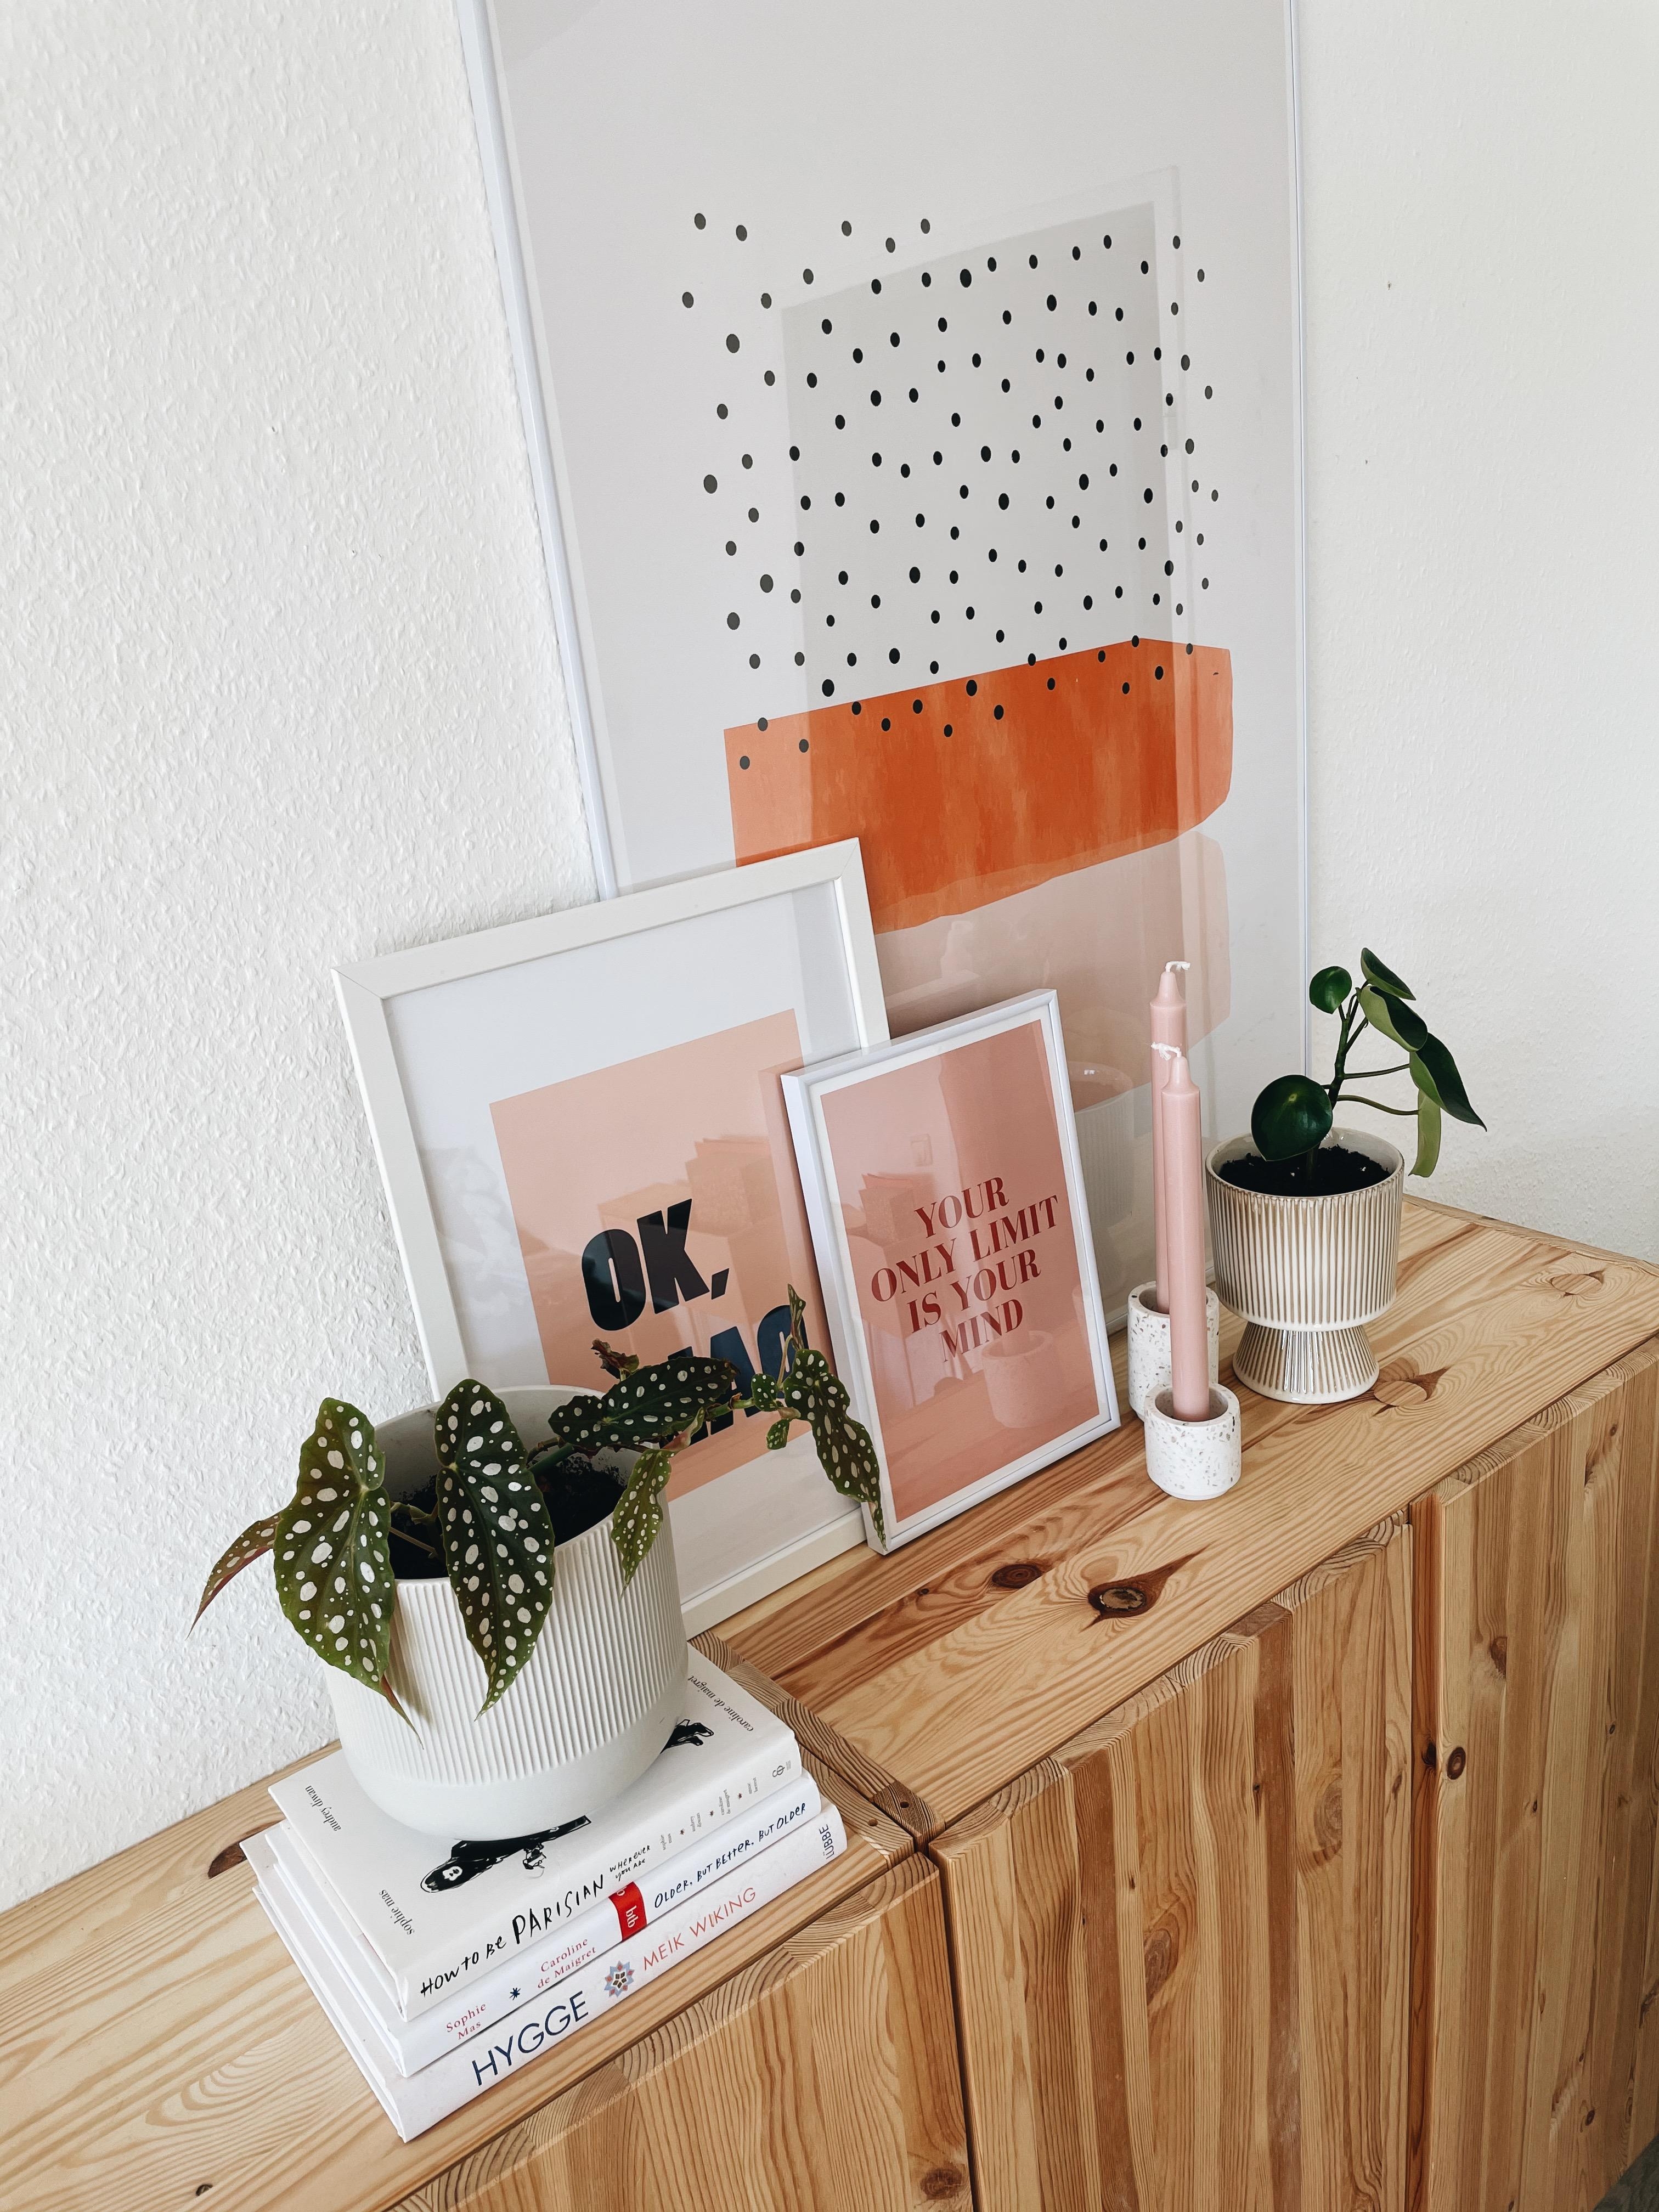 Ok, ciao 🧡
#home #posterliebe #frühlingsfarben #plants #couchstyle 